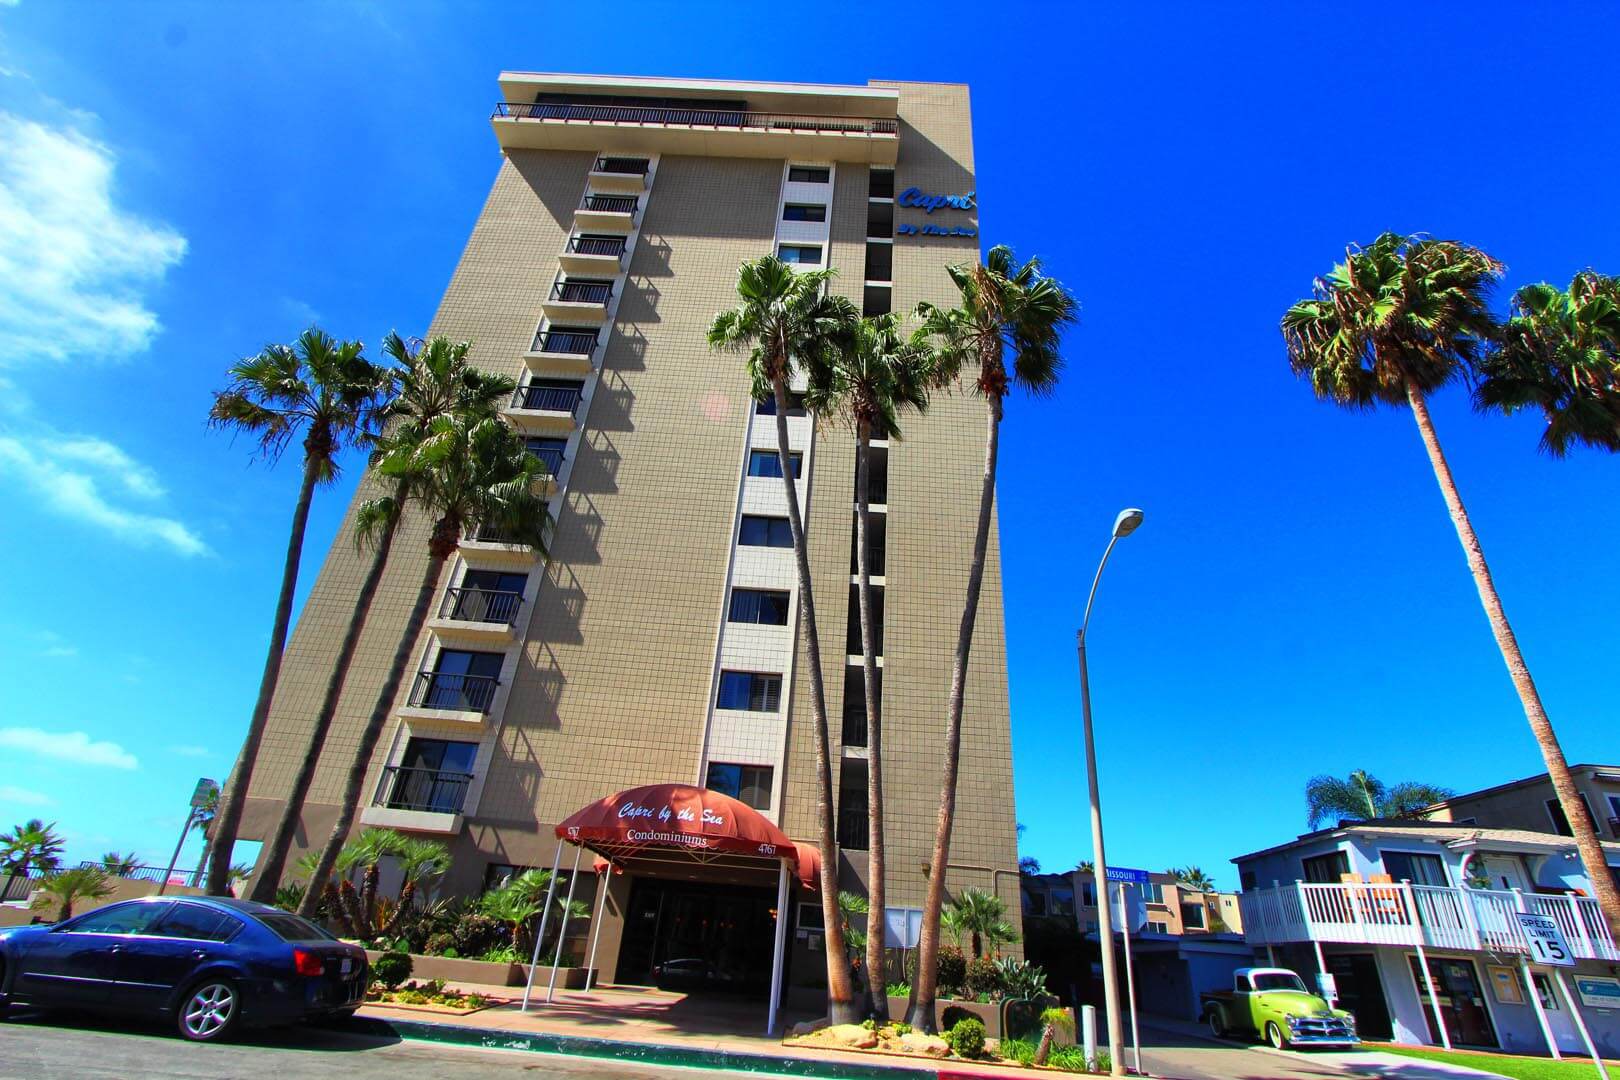 A view of the exterior building at VRI's Capri by the Sea in San Diego, California.